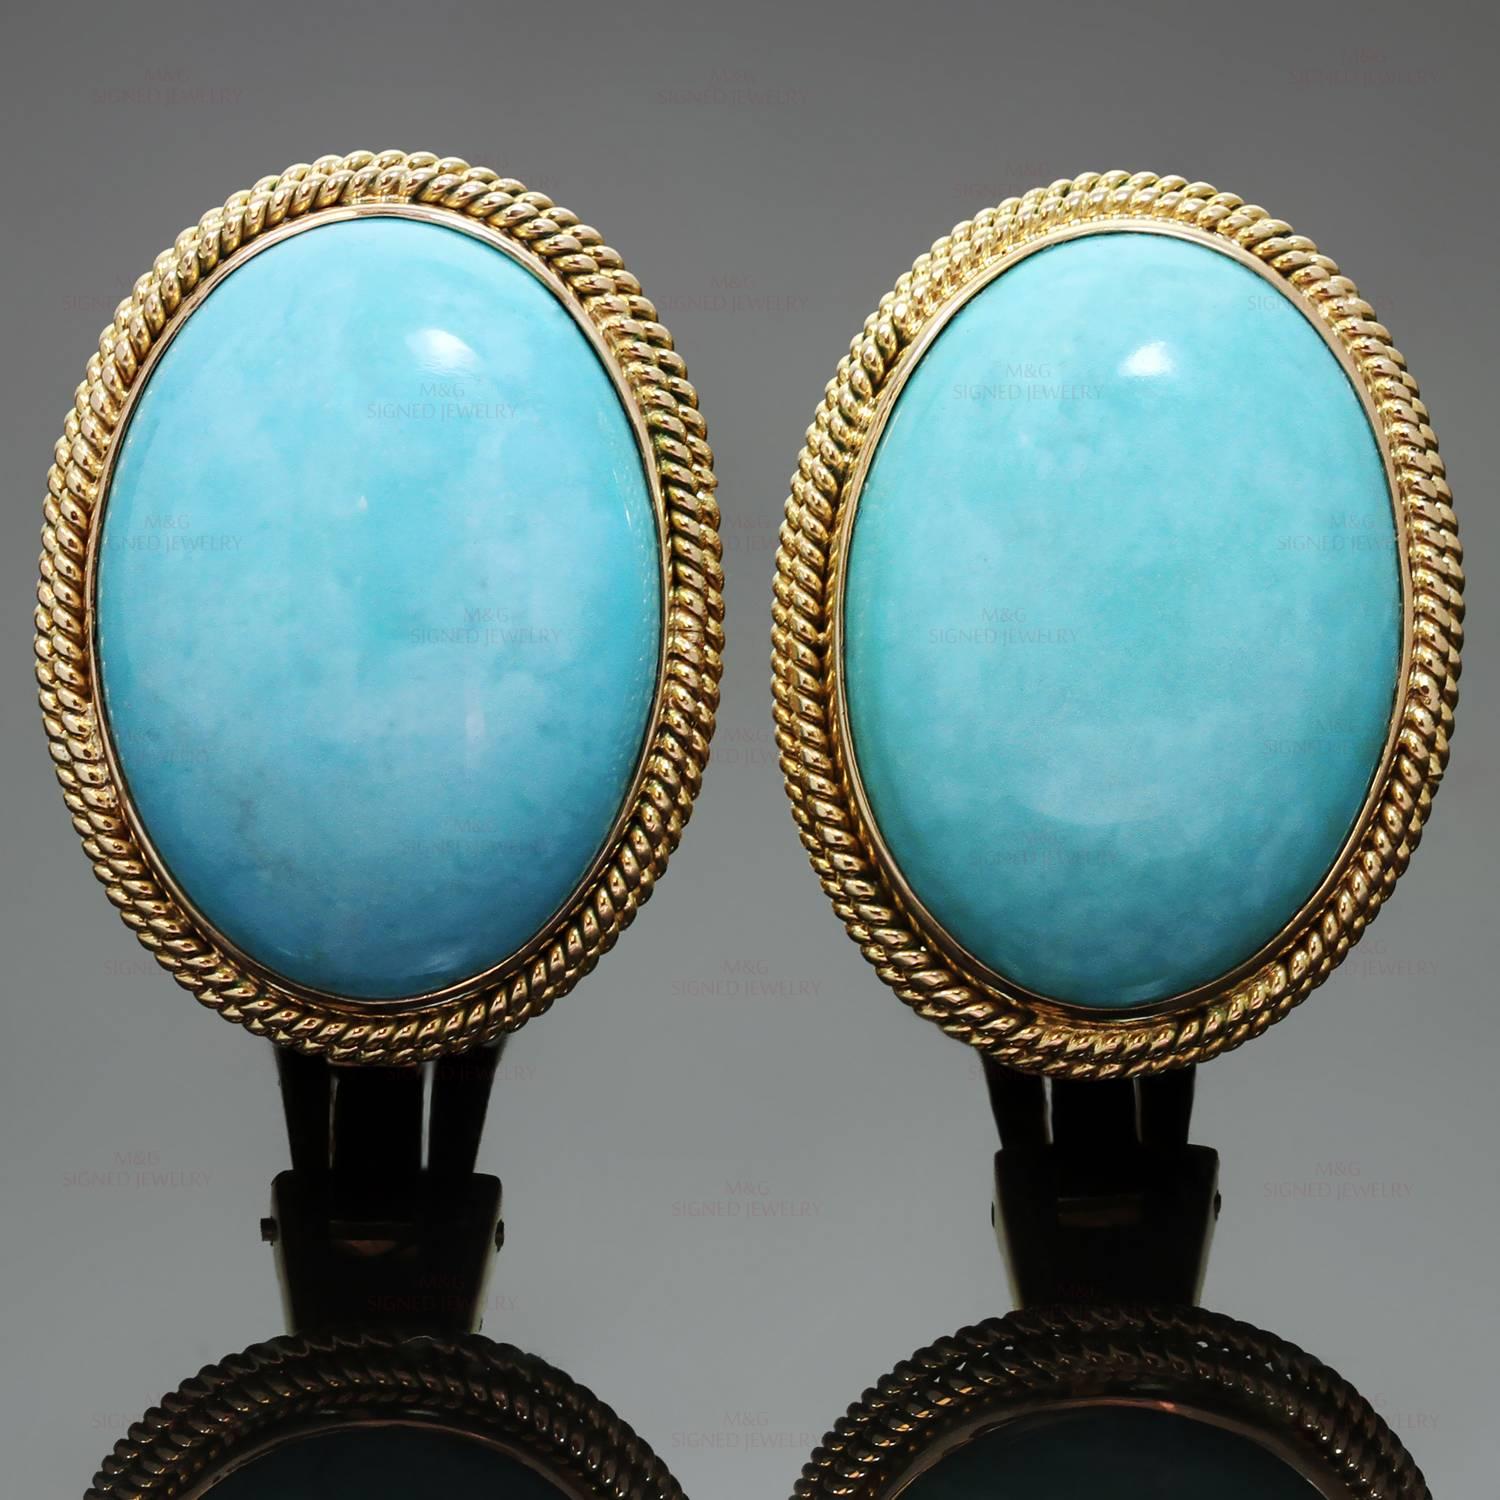 These elegant retro clip-on earrings are crafted in 14k yellow gold and set with genuine Arizona turquoise stones. The oval stones measure an estimated 17.2mm by 24.0mm. Made in United States circa 1960s. Measurements: 0.86